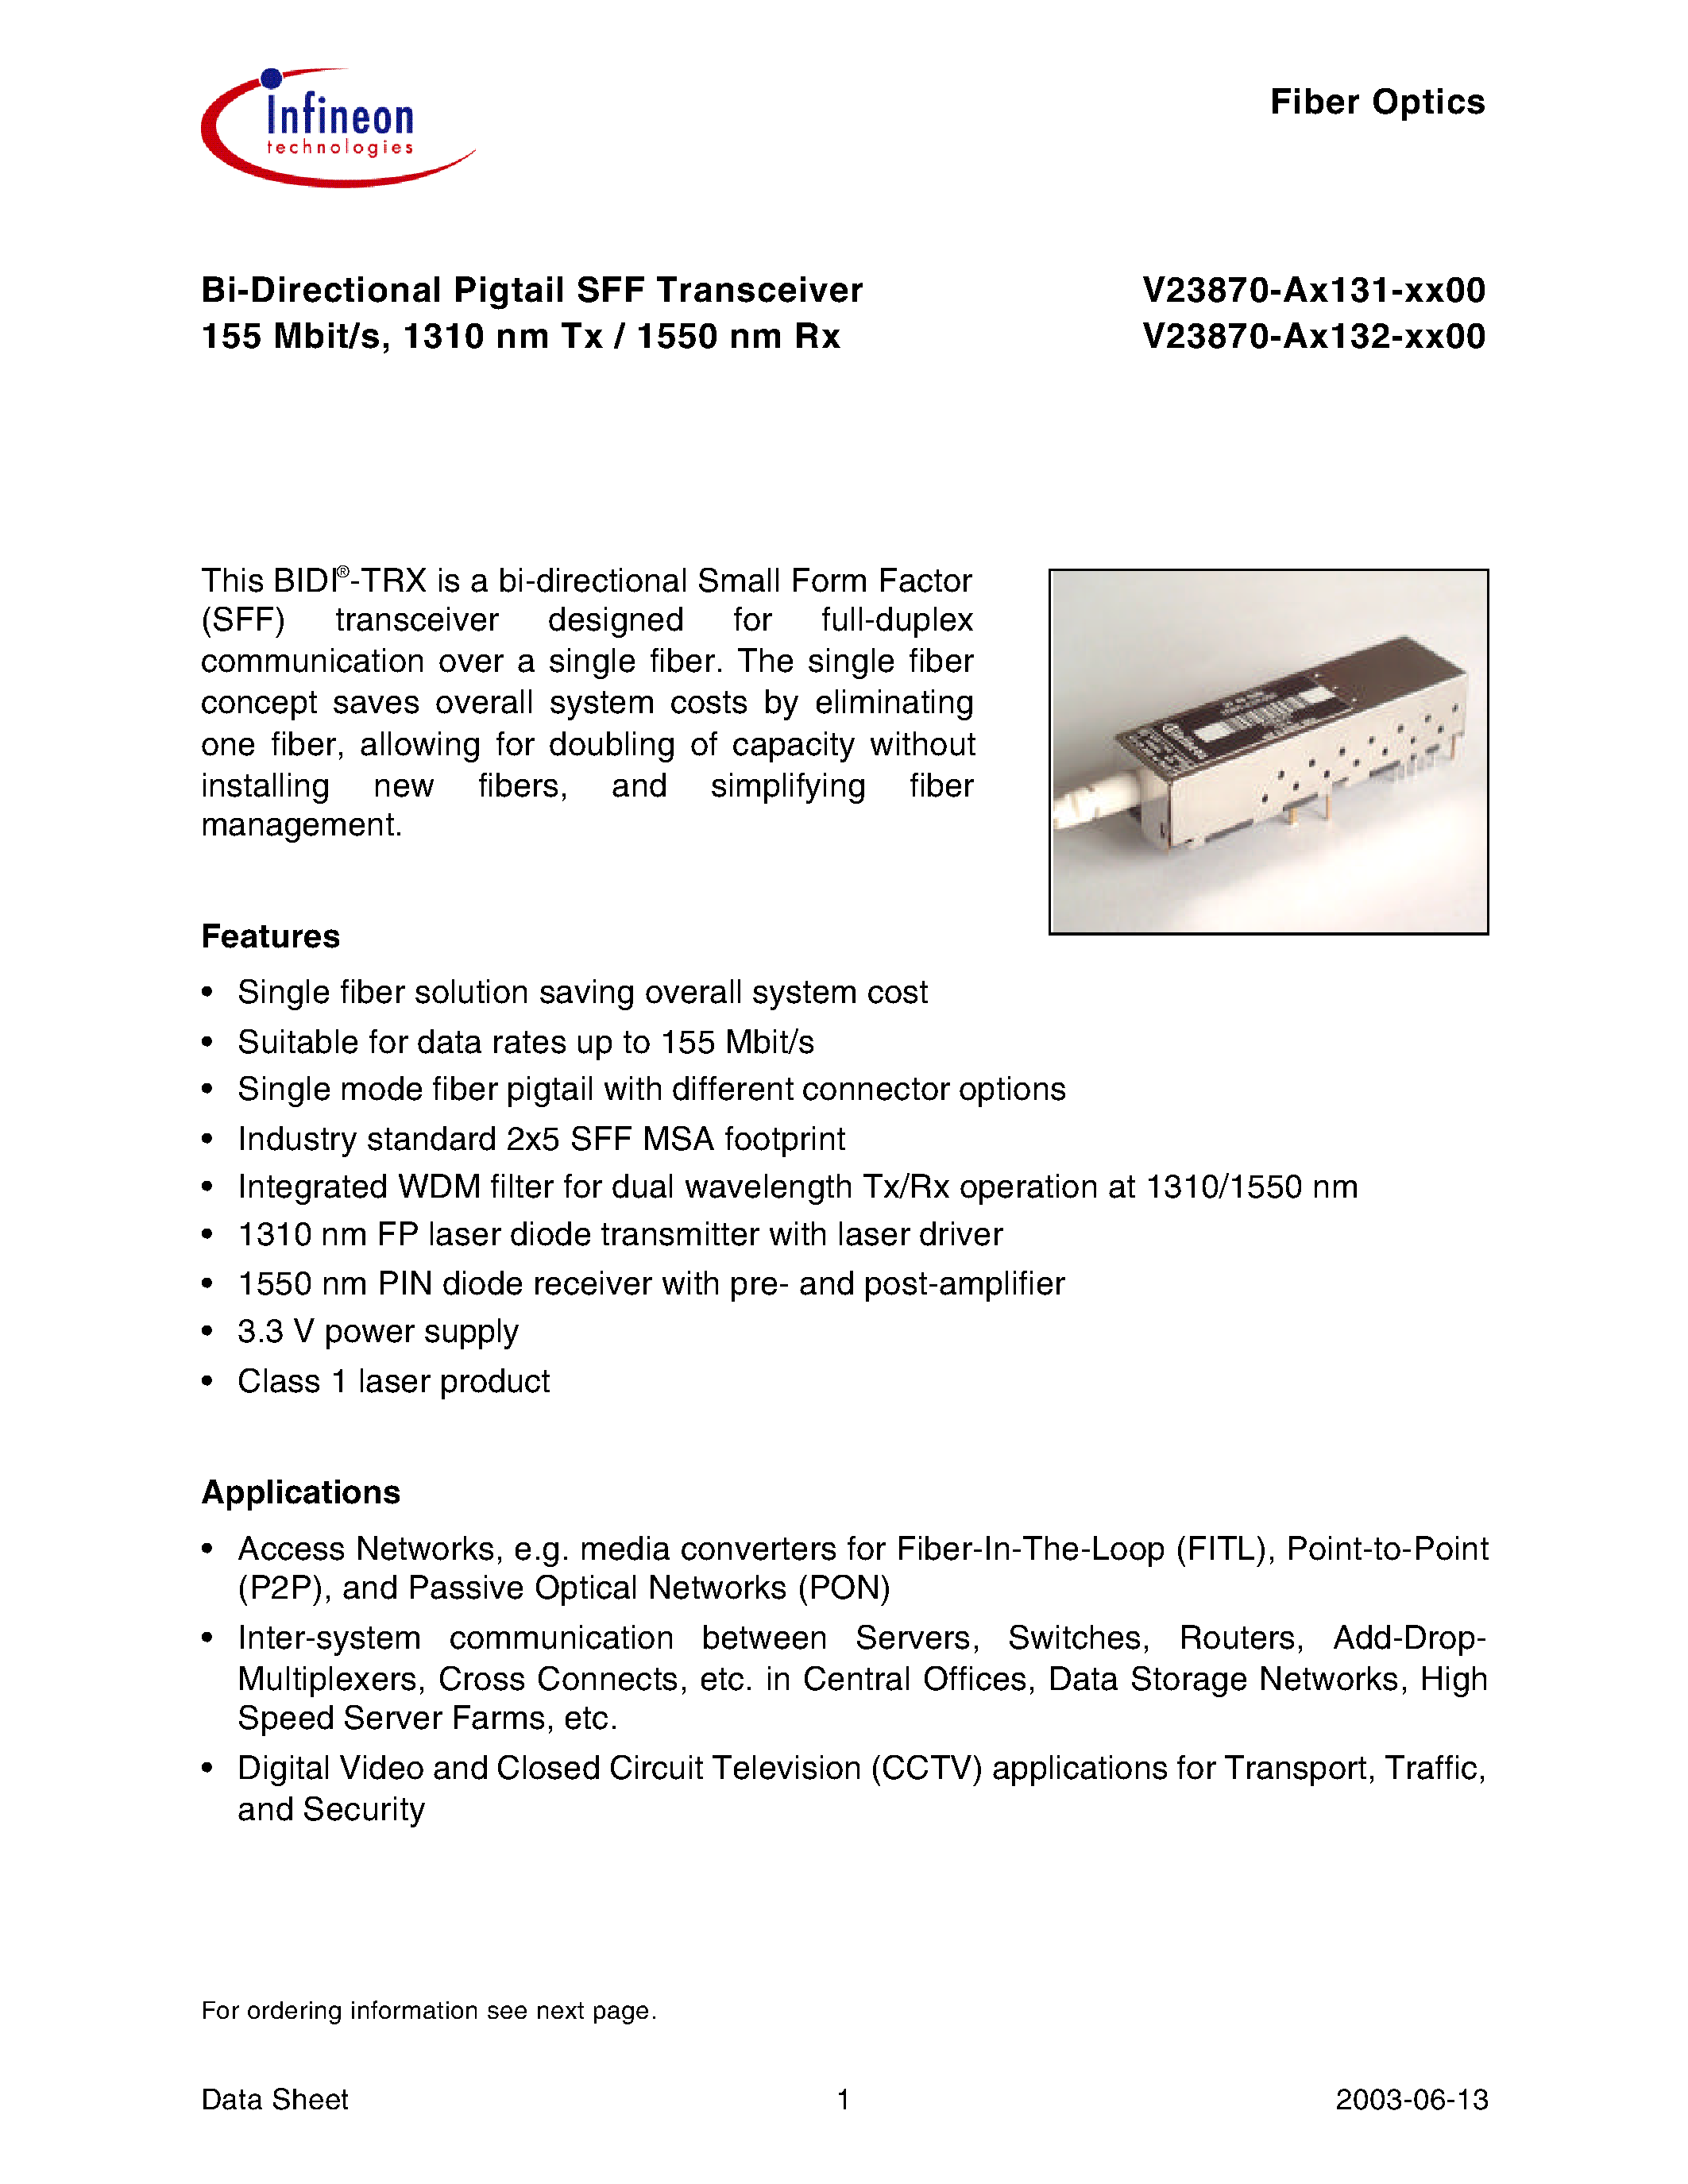 Datasheet V23870-A3132-K500 - Bi-Directional Pigtail SFF Transceiver 155 Mbit/s/ 1310 nm Tx / 1550 nm Rx page 1